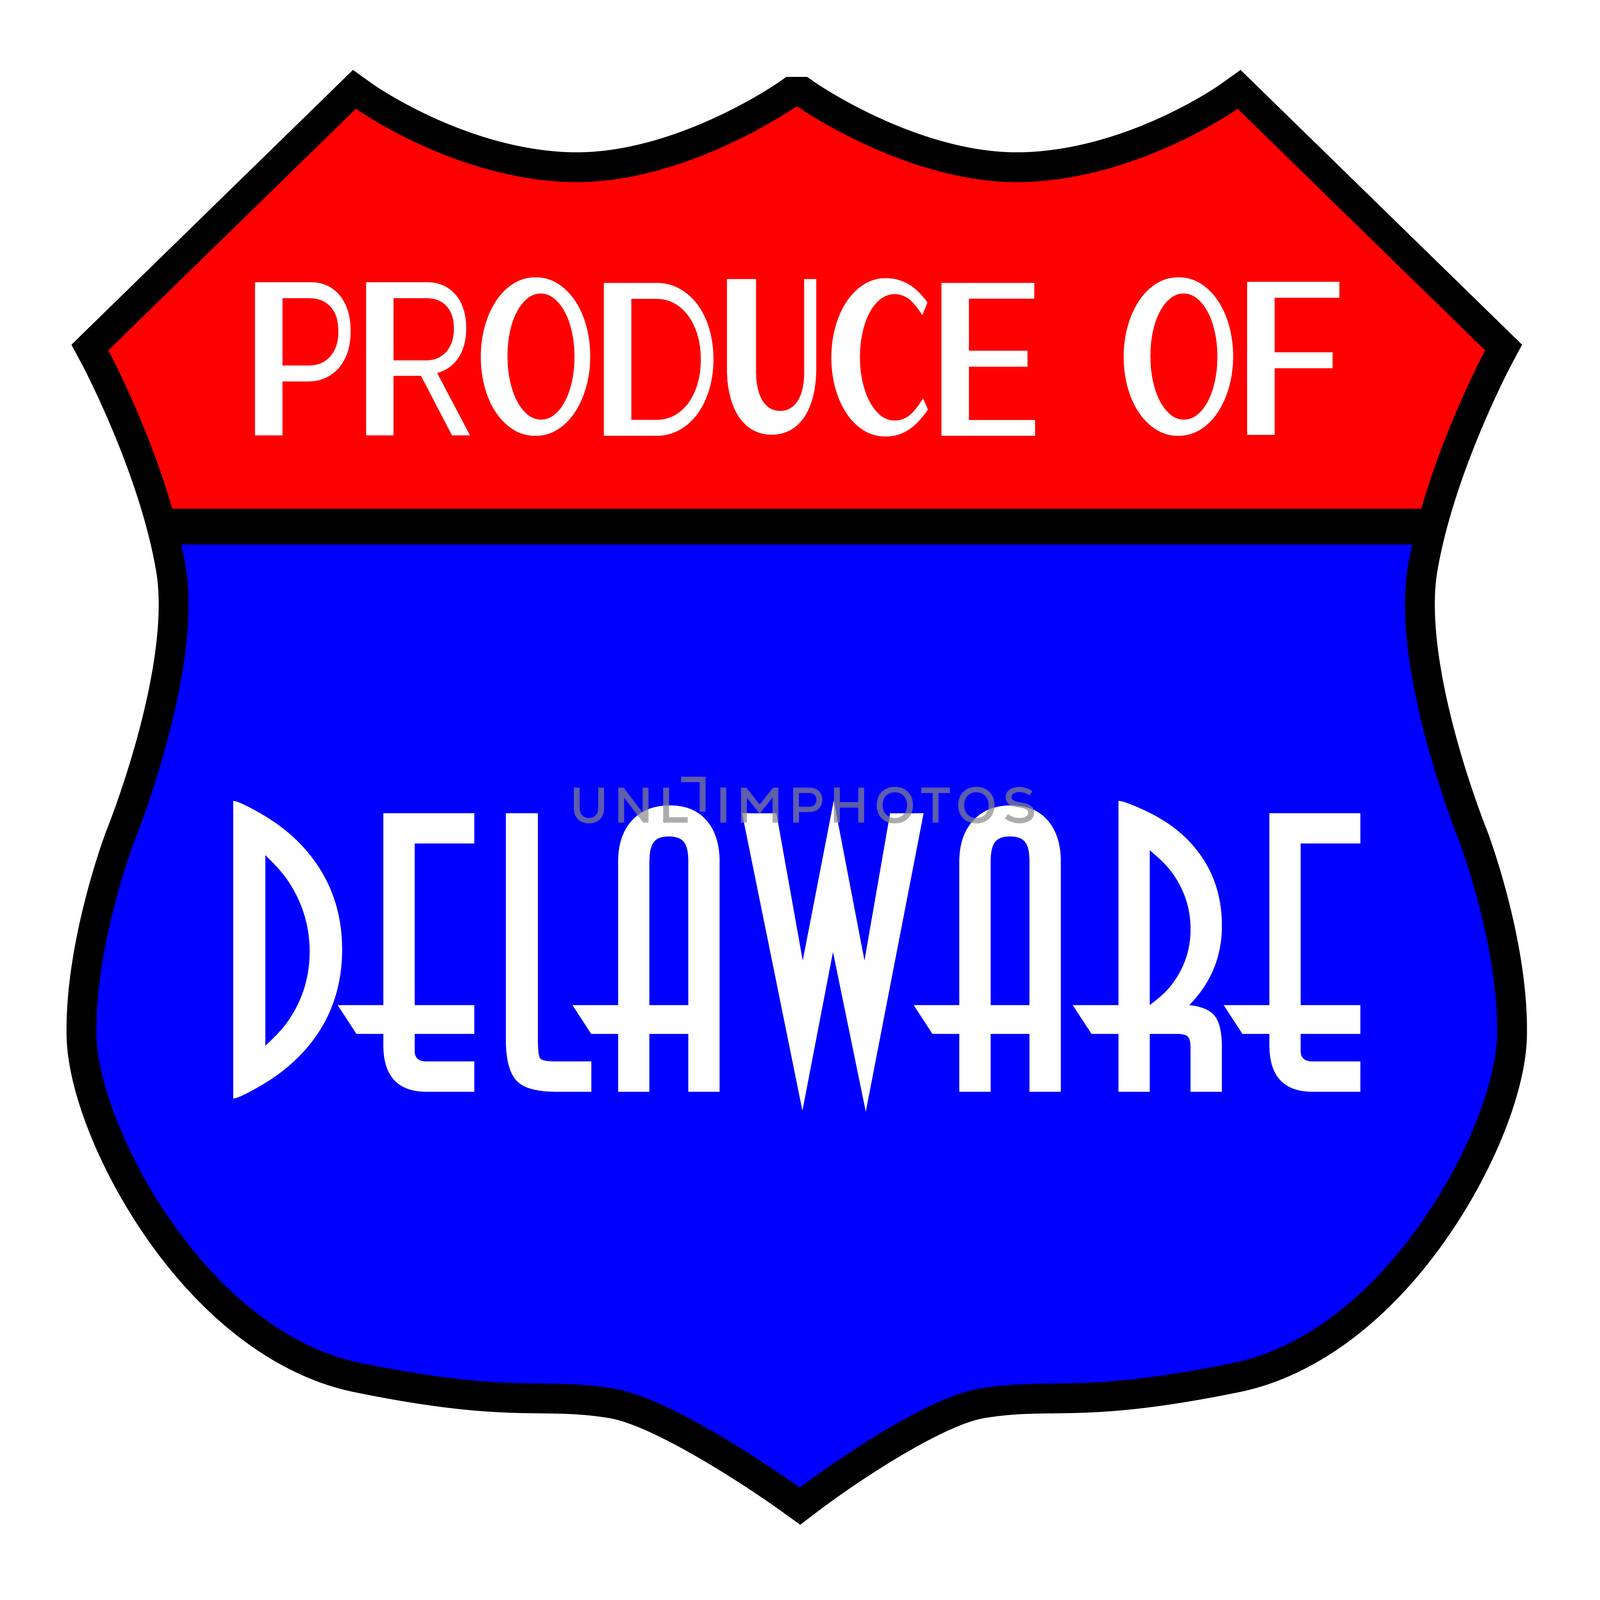 Route 66 style traffic sign with the legend Produce Of Delaware isolated